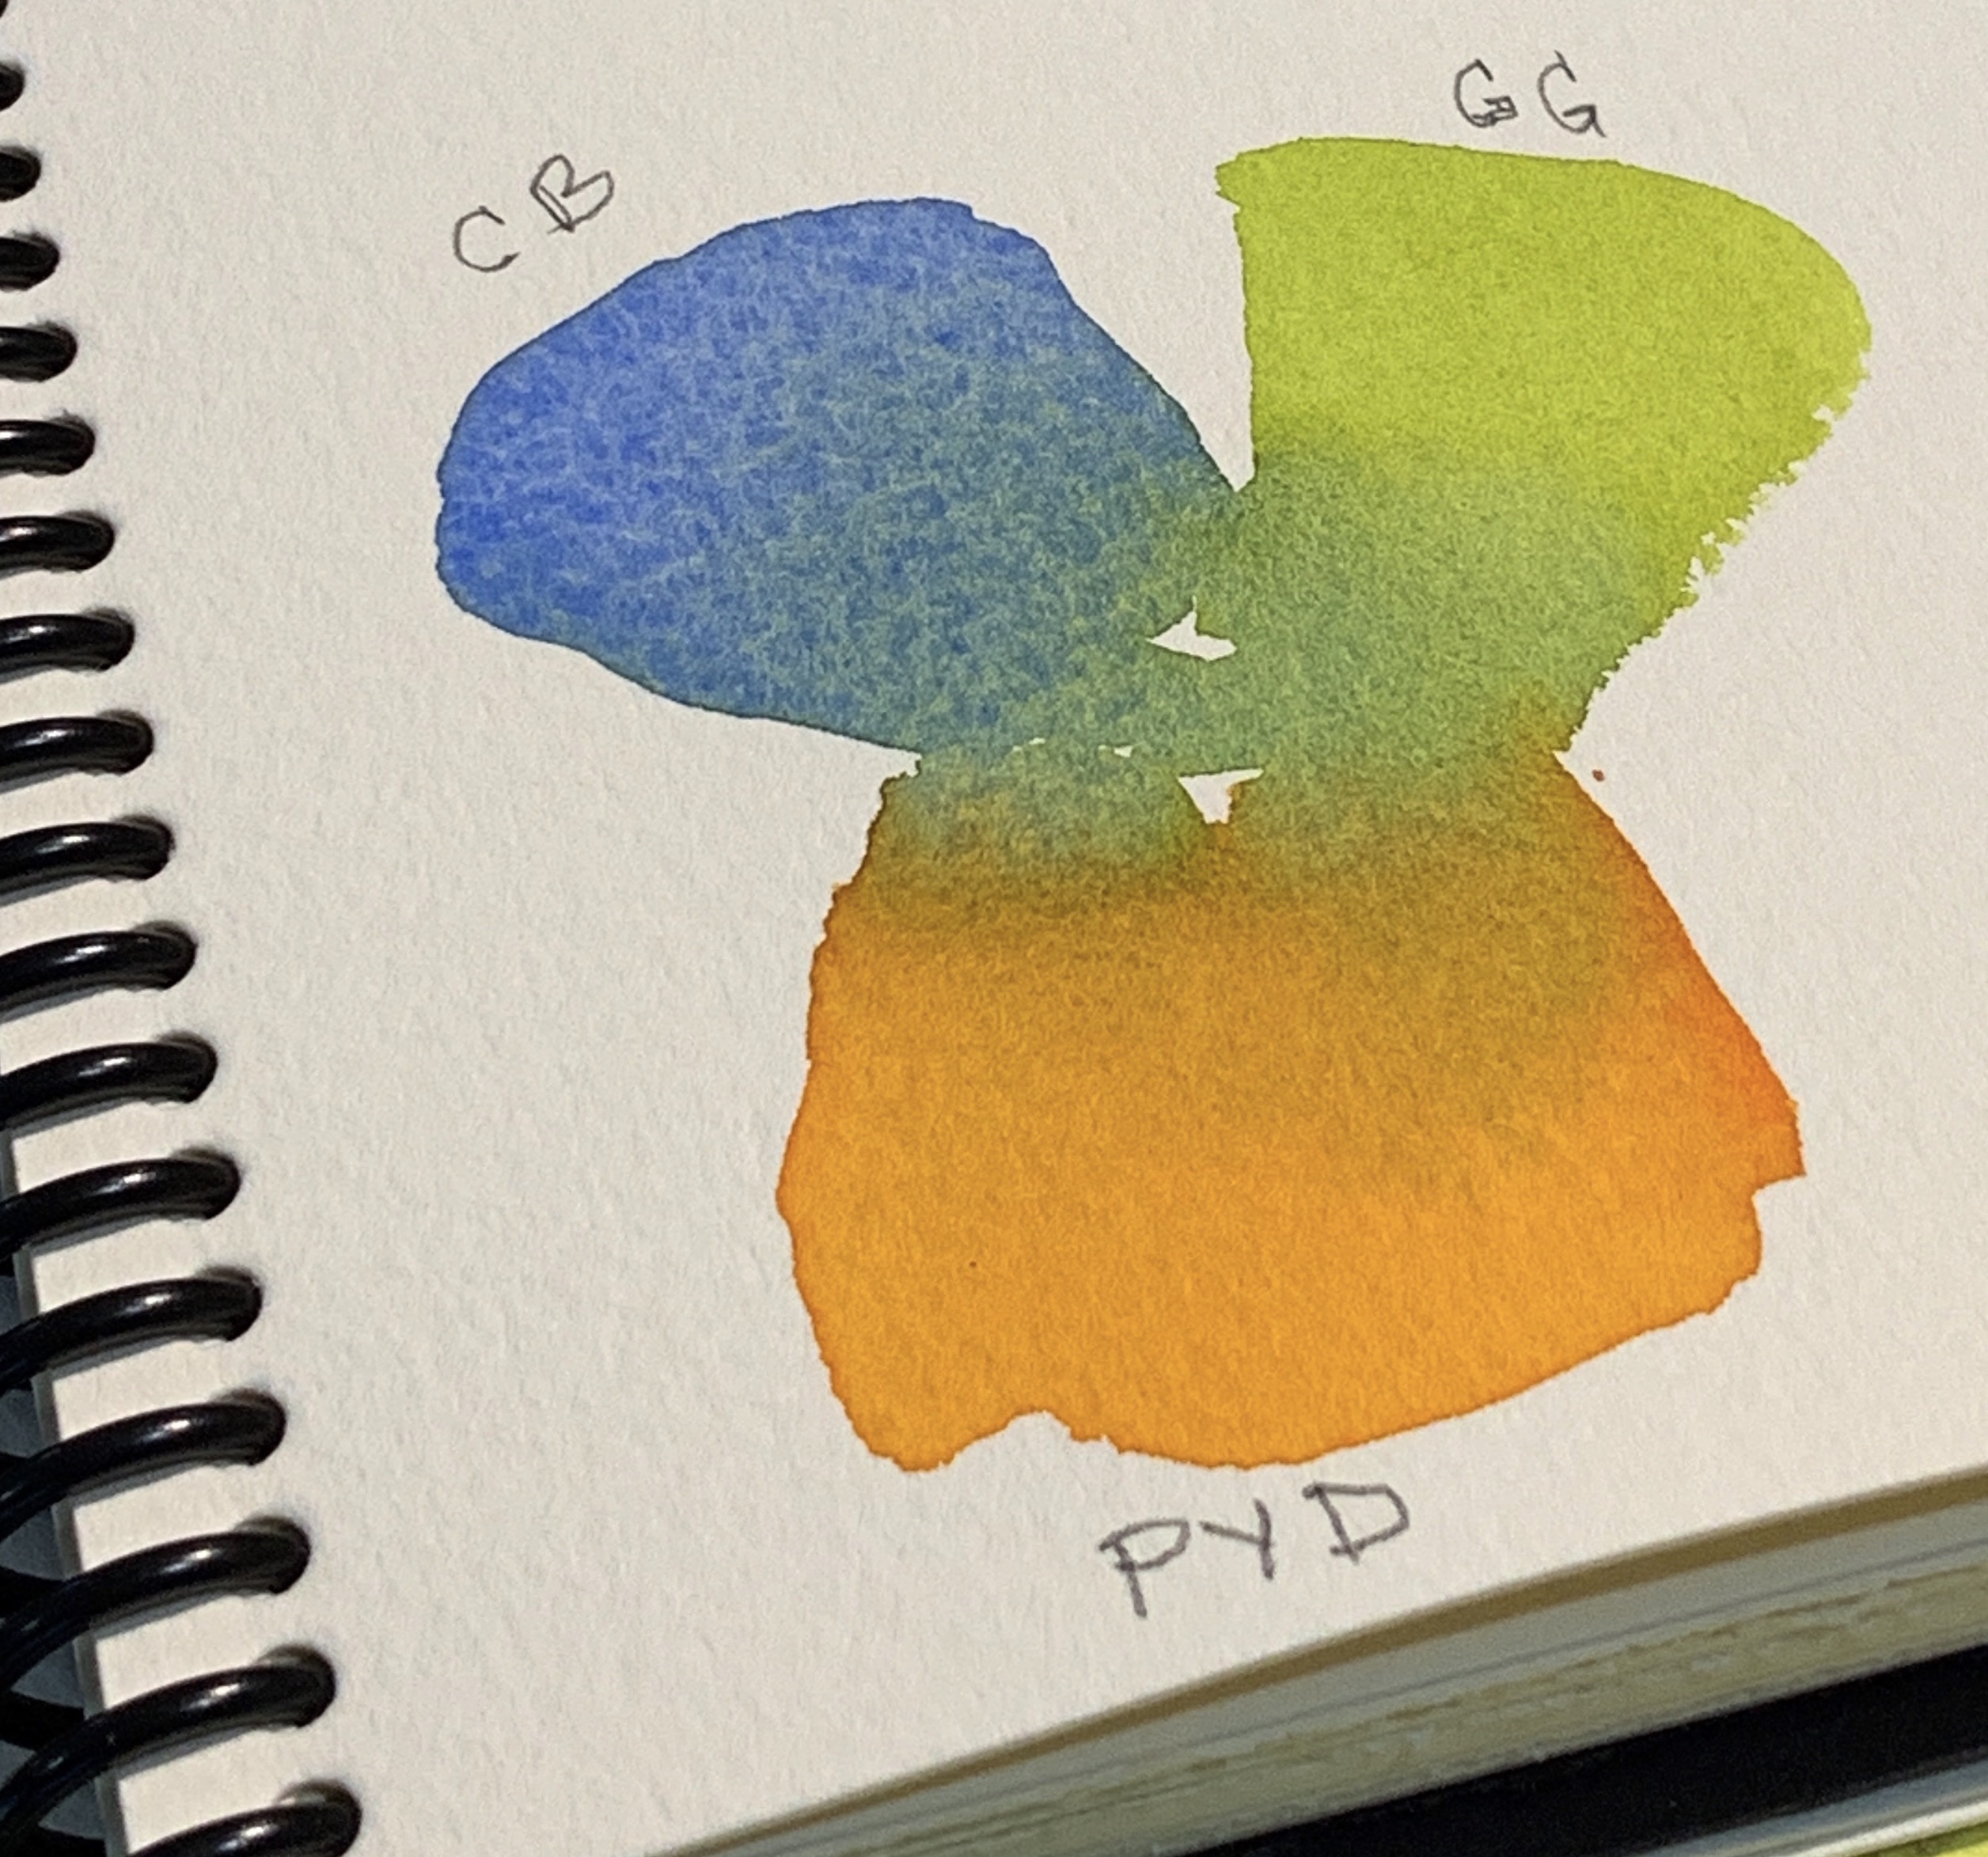 Choose three colors for your watercolor painting